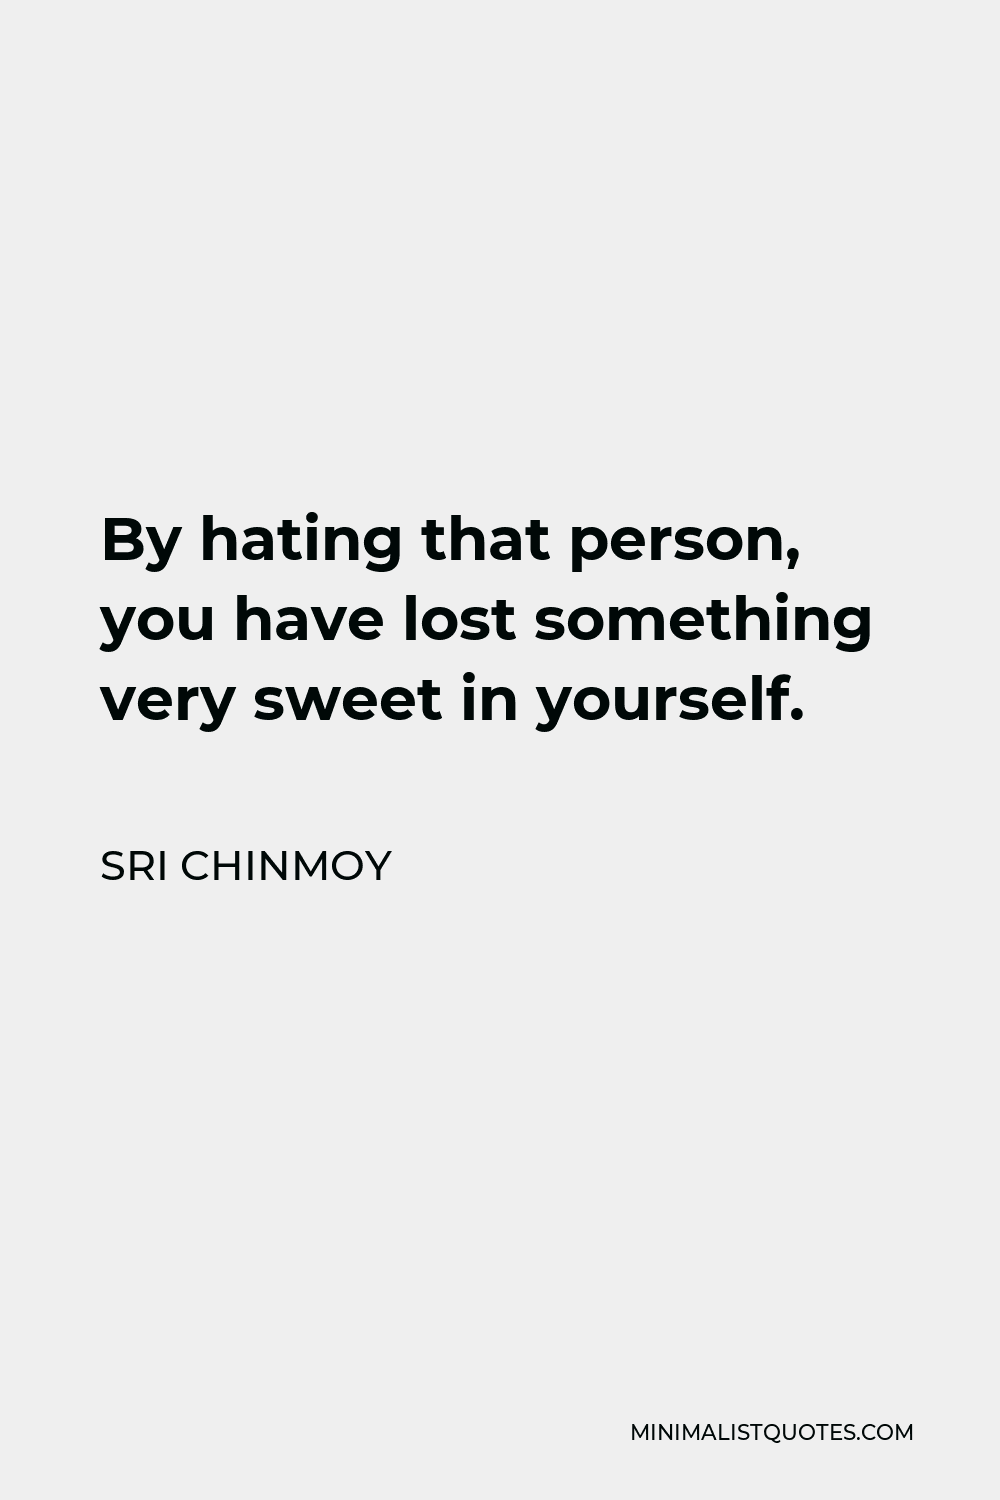 Sri Chinmoy Quote - By hating that person, you have lost something very sweet in yourself.